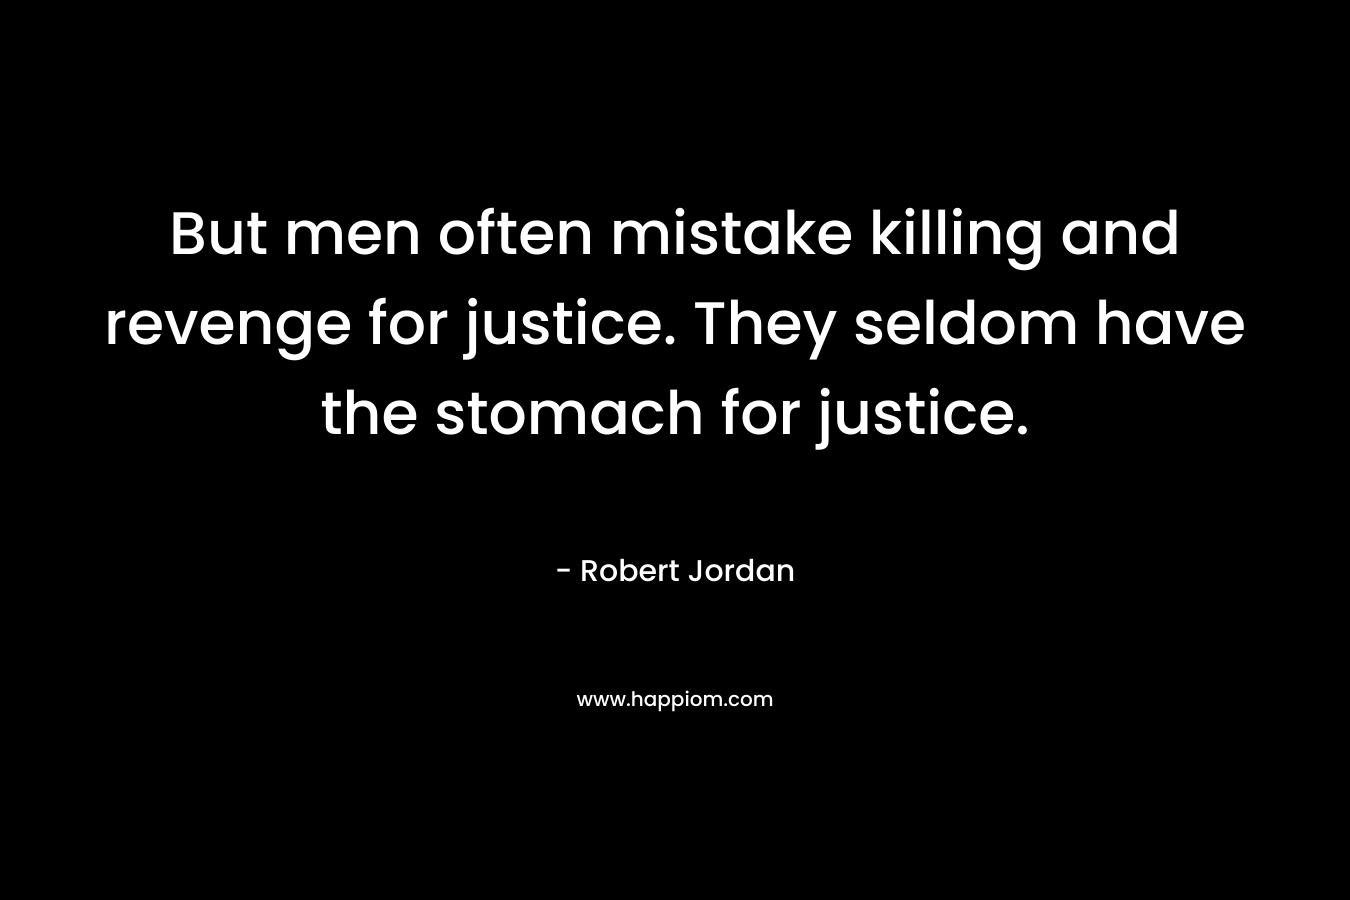 But men often mistake killing and revenge for justice. They seldom have the stomach for justice. – Robert Jordan